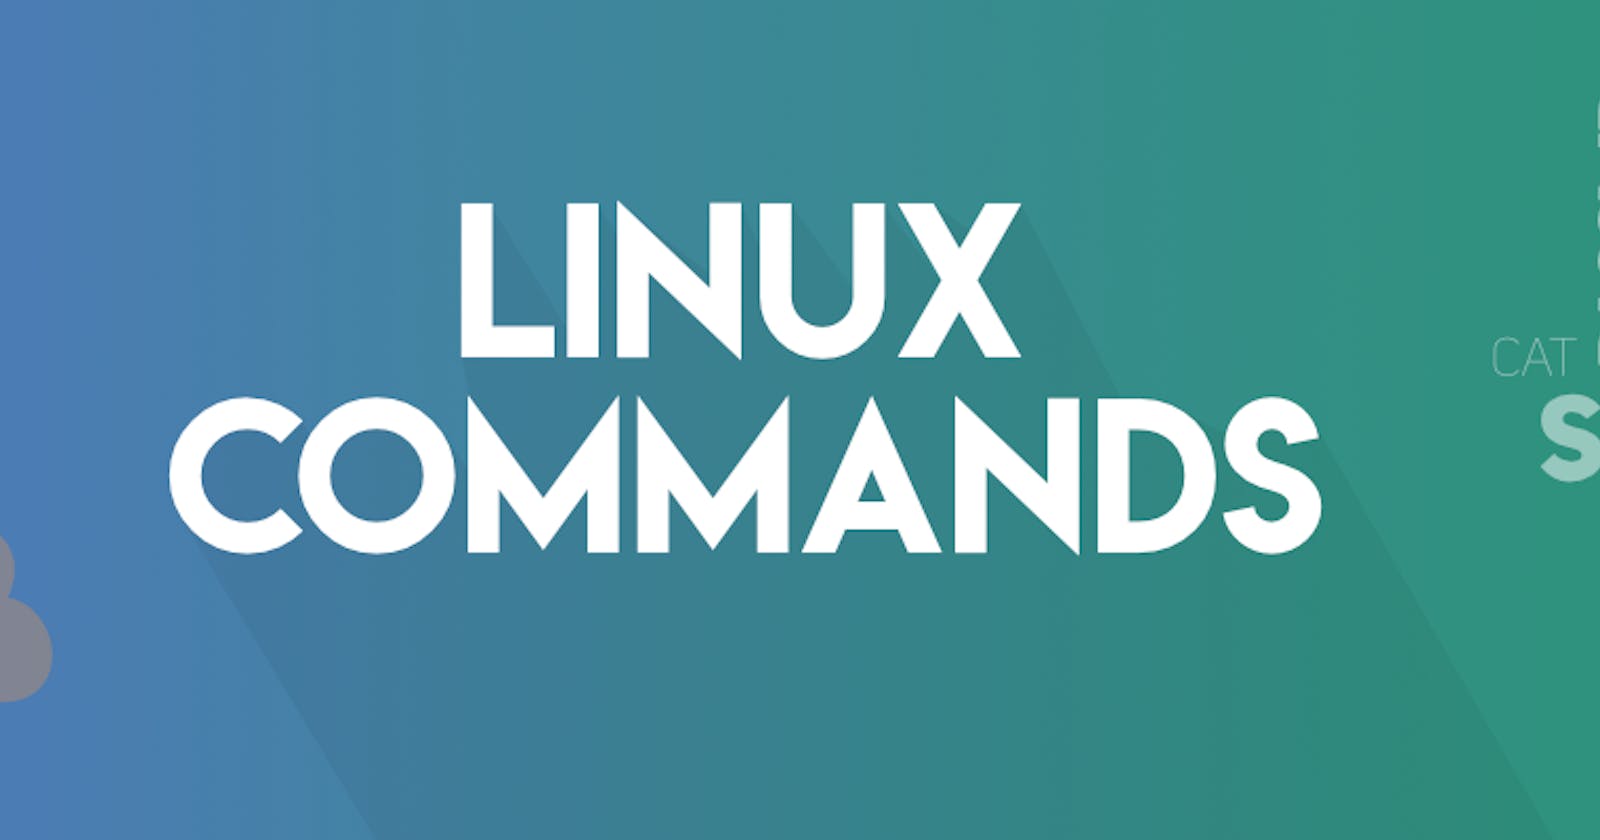 Day-3 Basic Commands in Linux - Part 2